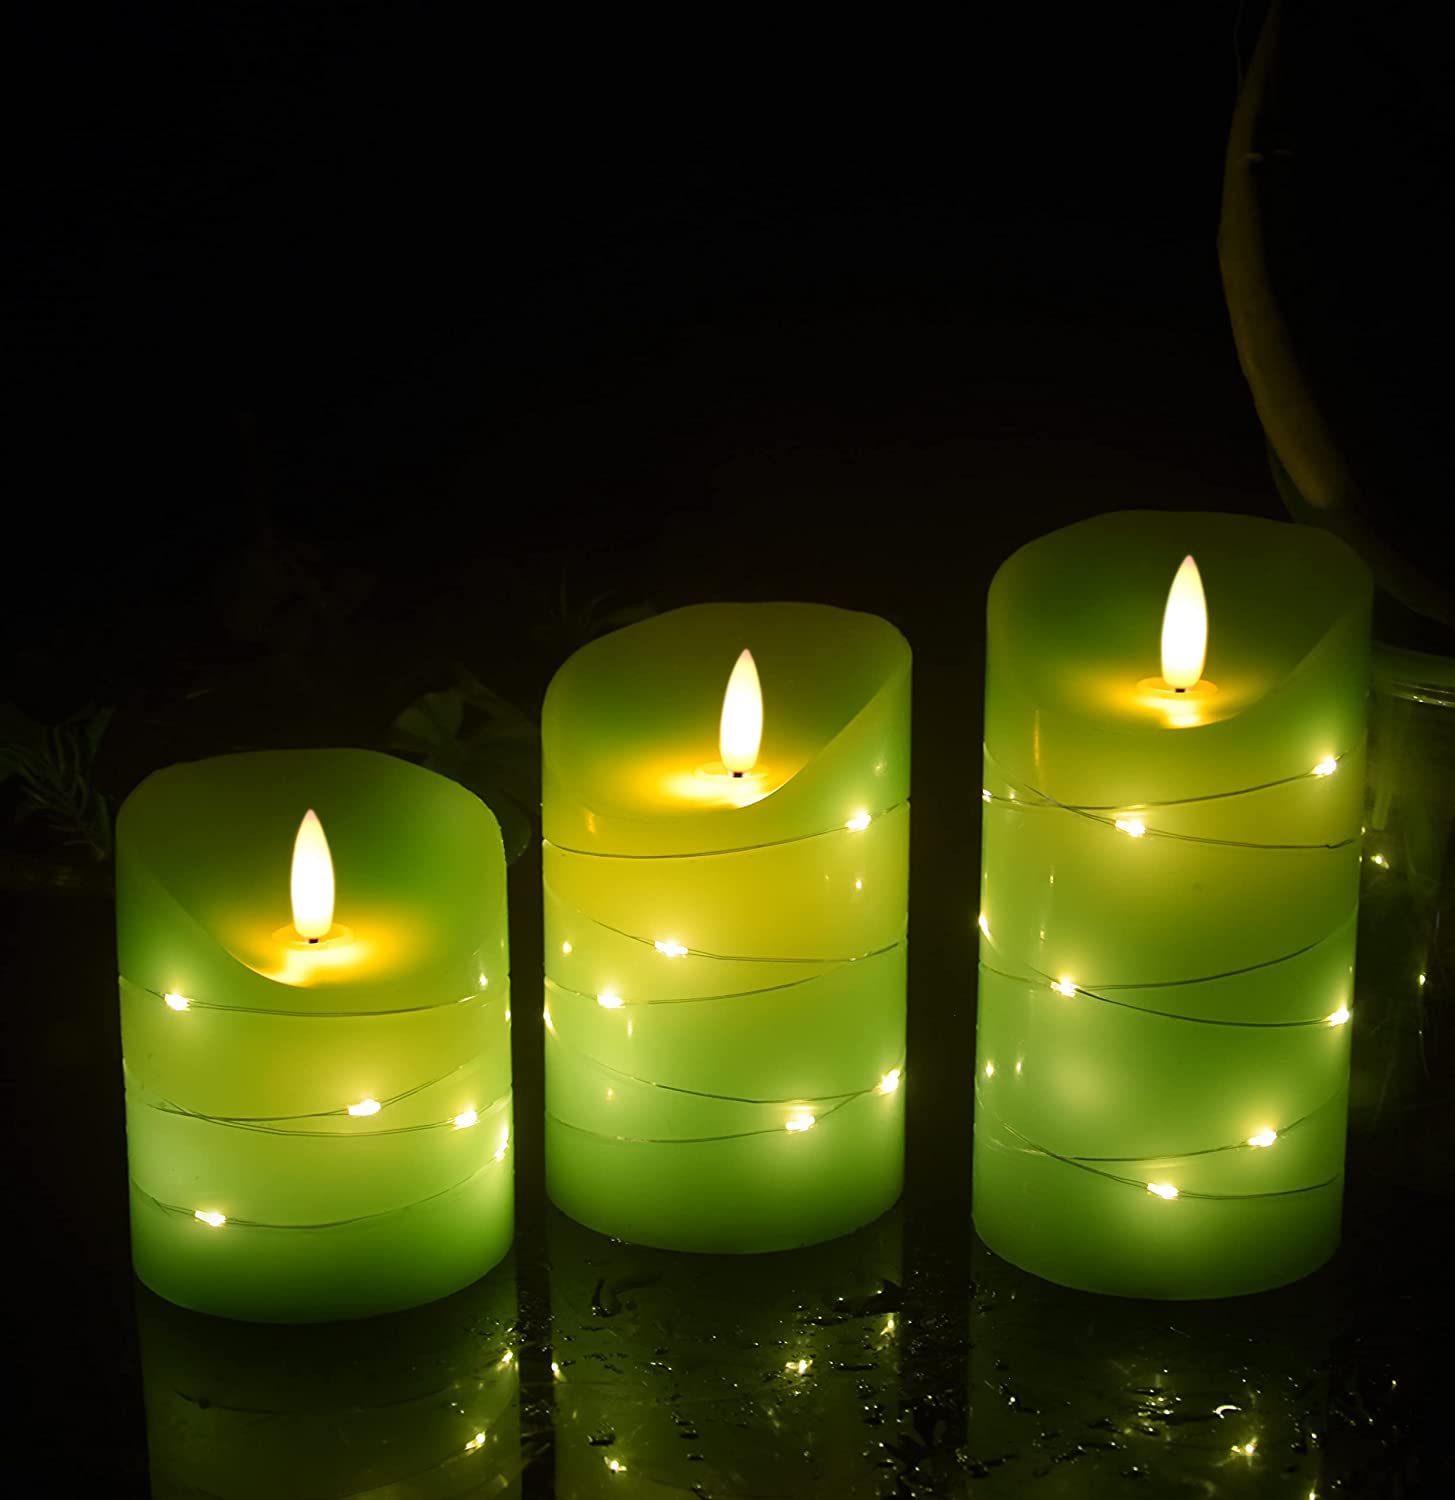 Green LED flameless Candle with Embedded Starlight String, 3 LED Candles, 10-Key Remote Control, 24-Hour Timer Function, Dancing Flame, Real Wax, Battery Powered. (Grass Green)